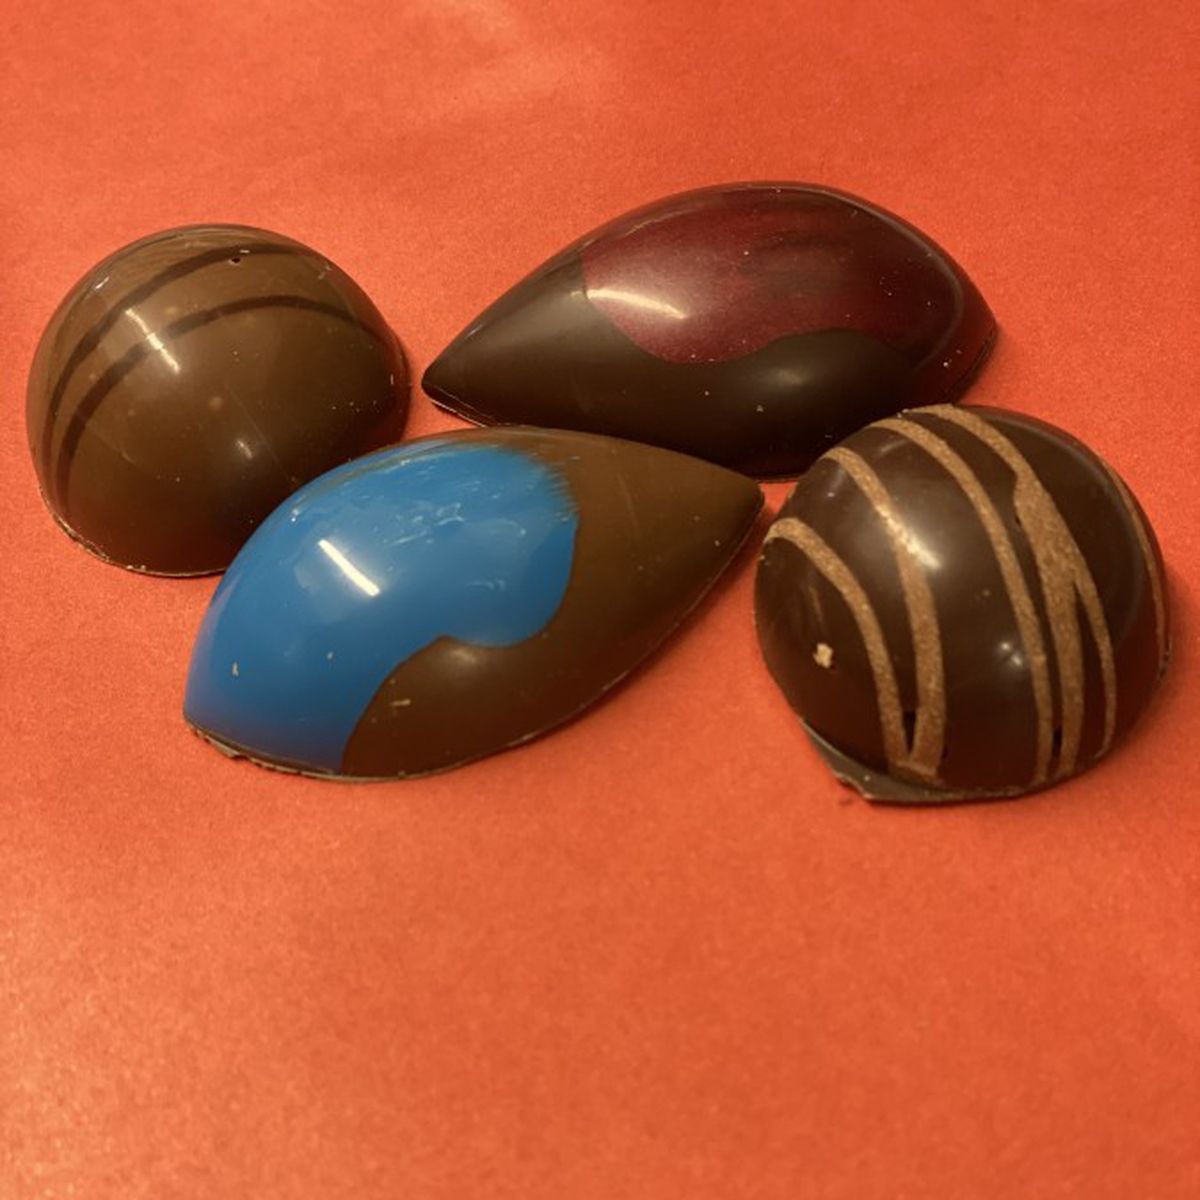 Truffles with colorful stripes on an orange background.